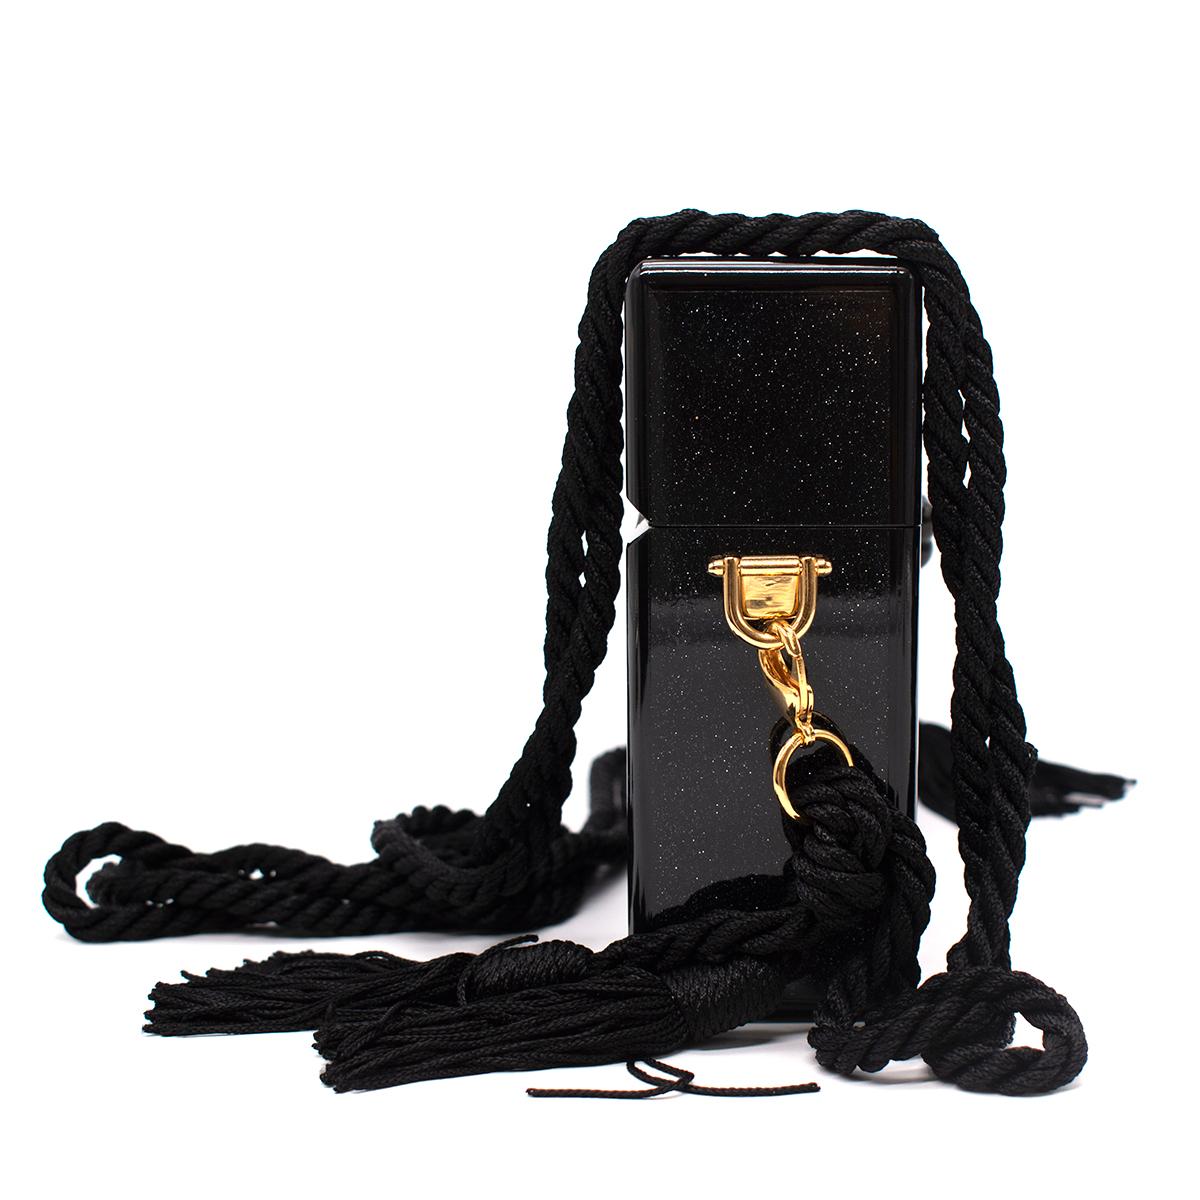 Edie Parker Black Small Trunk Stars Acrylic Bag

- Mirror effect inside 
- Gold and mirror stripe at the front 
- Star mirror details on the corner 
- Rope cross-body strap 
- Tassels on the strap
- Clasp fastening at centre 
- Dust bag included